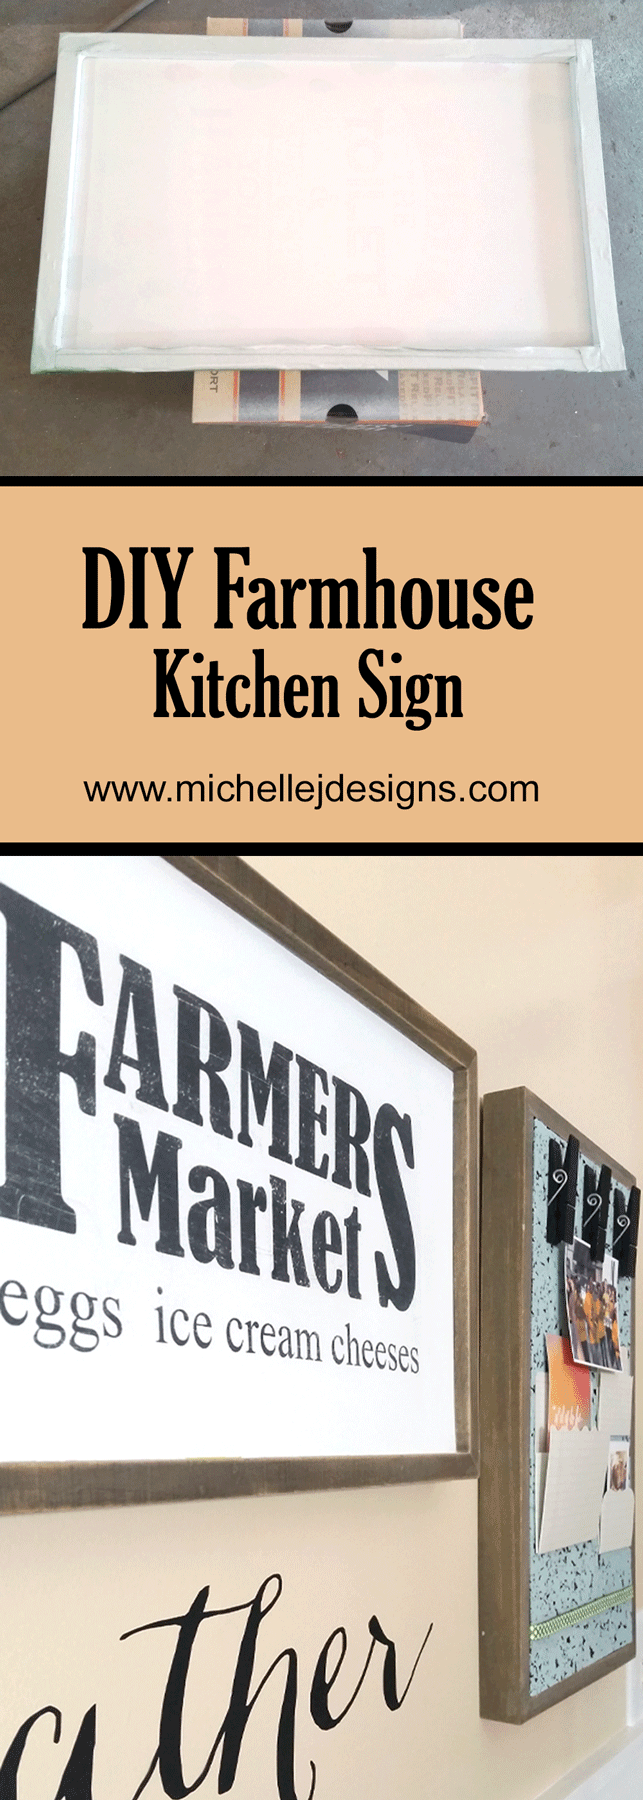 Farmhouse decor is all of the rage these days and I love it too. I am creating a DIY farmhouse kitchen sign that says Farmers Market! - www.michellejdesigns.com